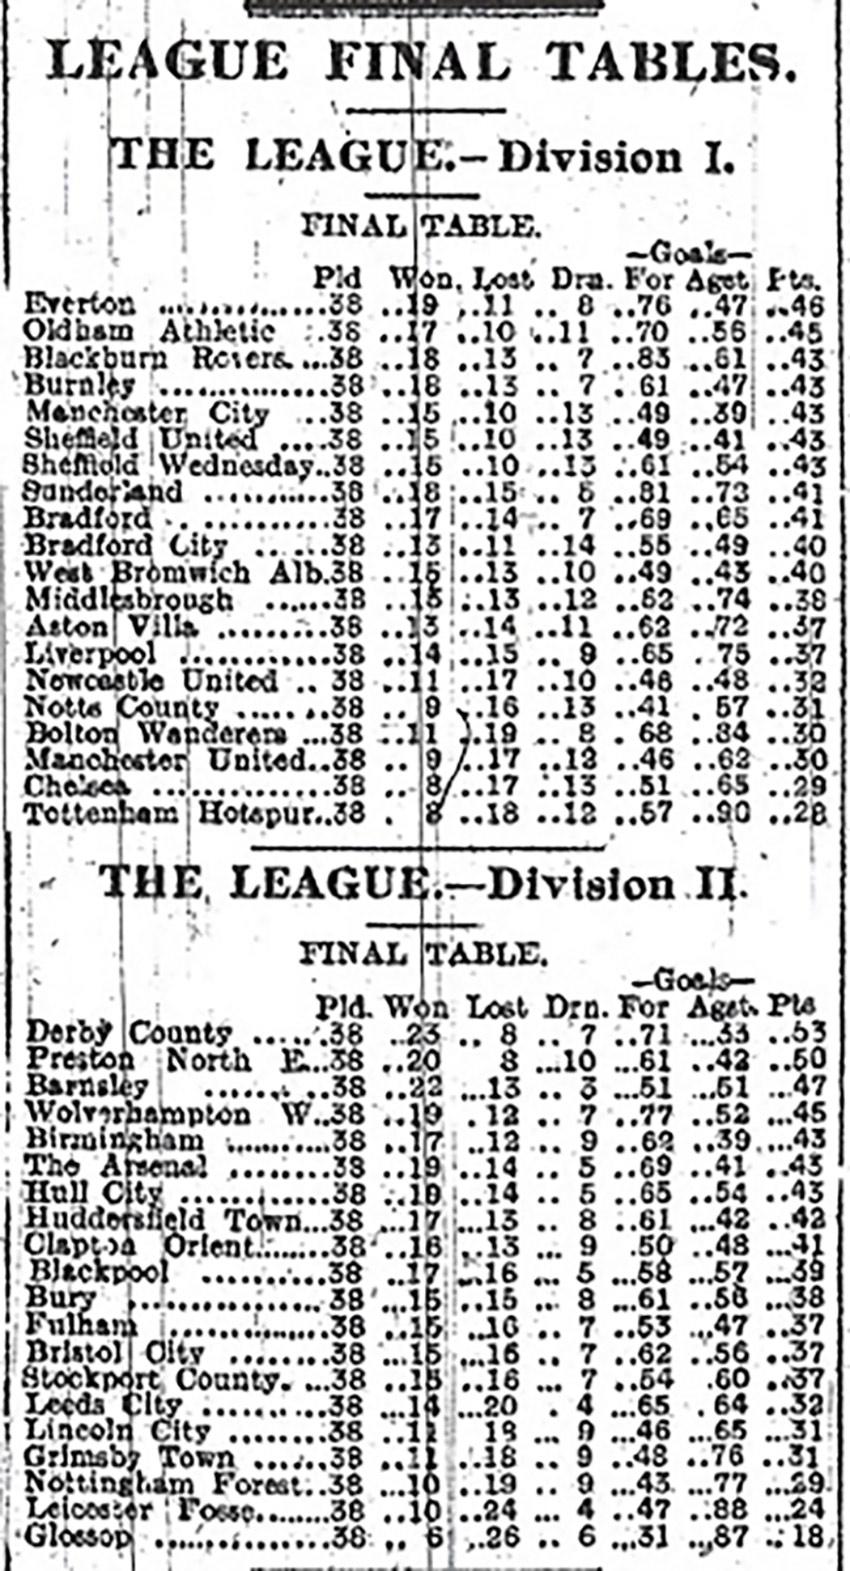 a look at the 1914/15 league tables